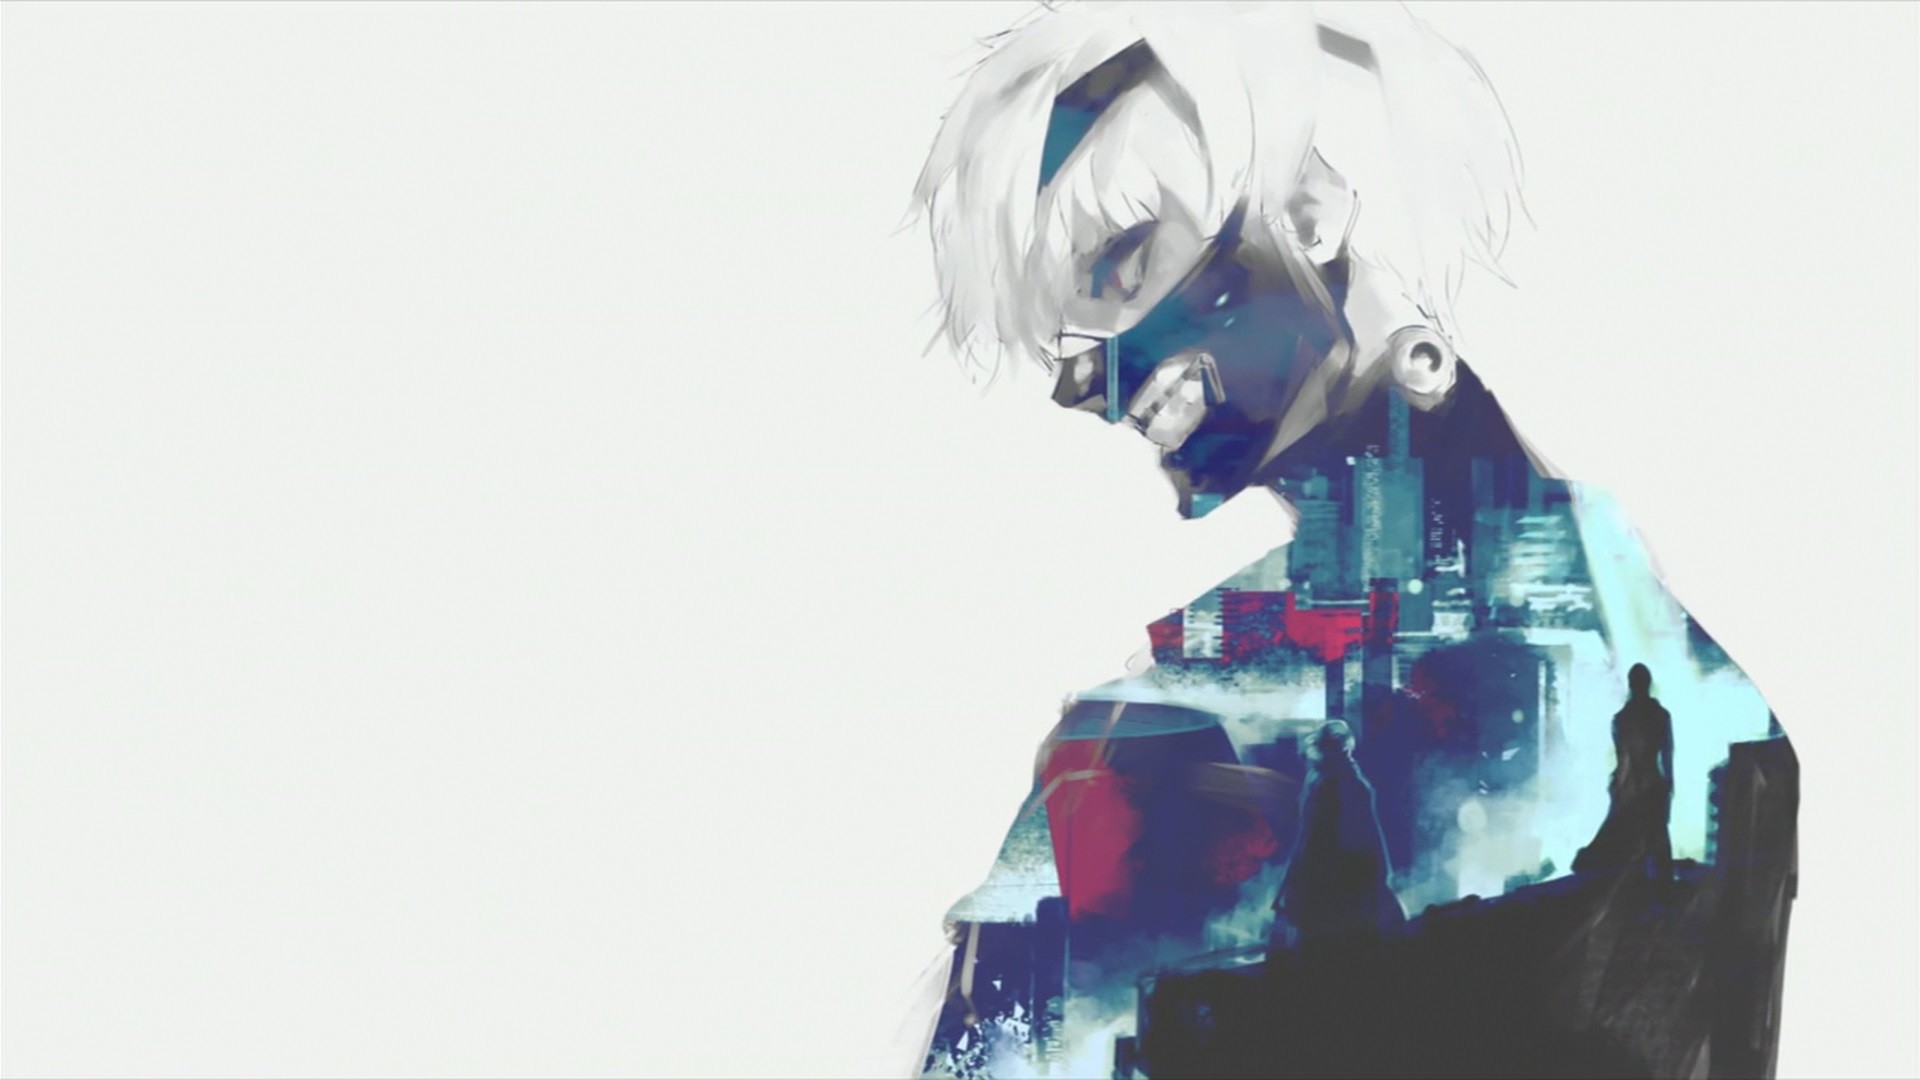 1920x1080 615 Tokyo Ghoul HD Wallpapers | Backgrounds - Wallpaper Abyss - Page 13